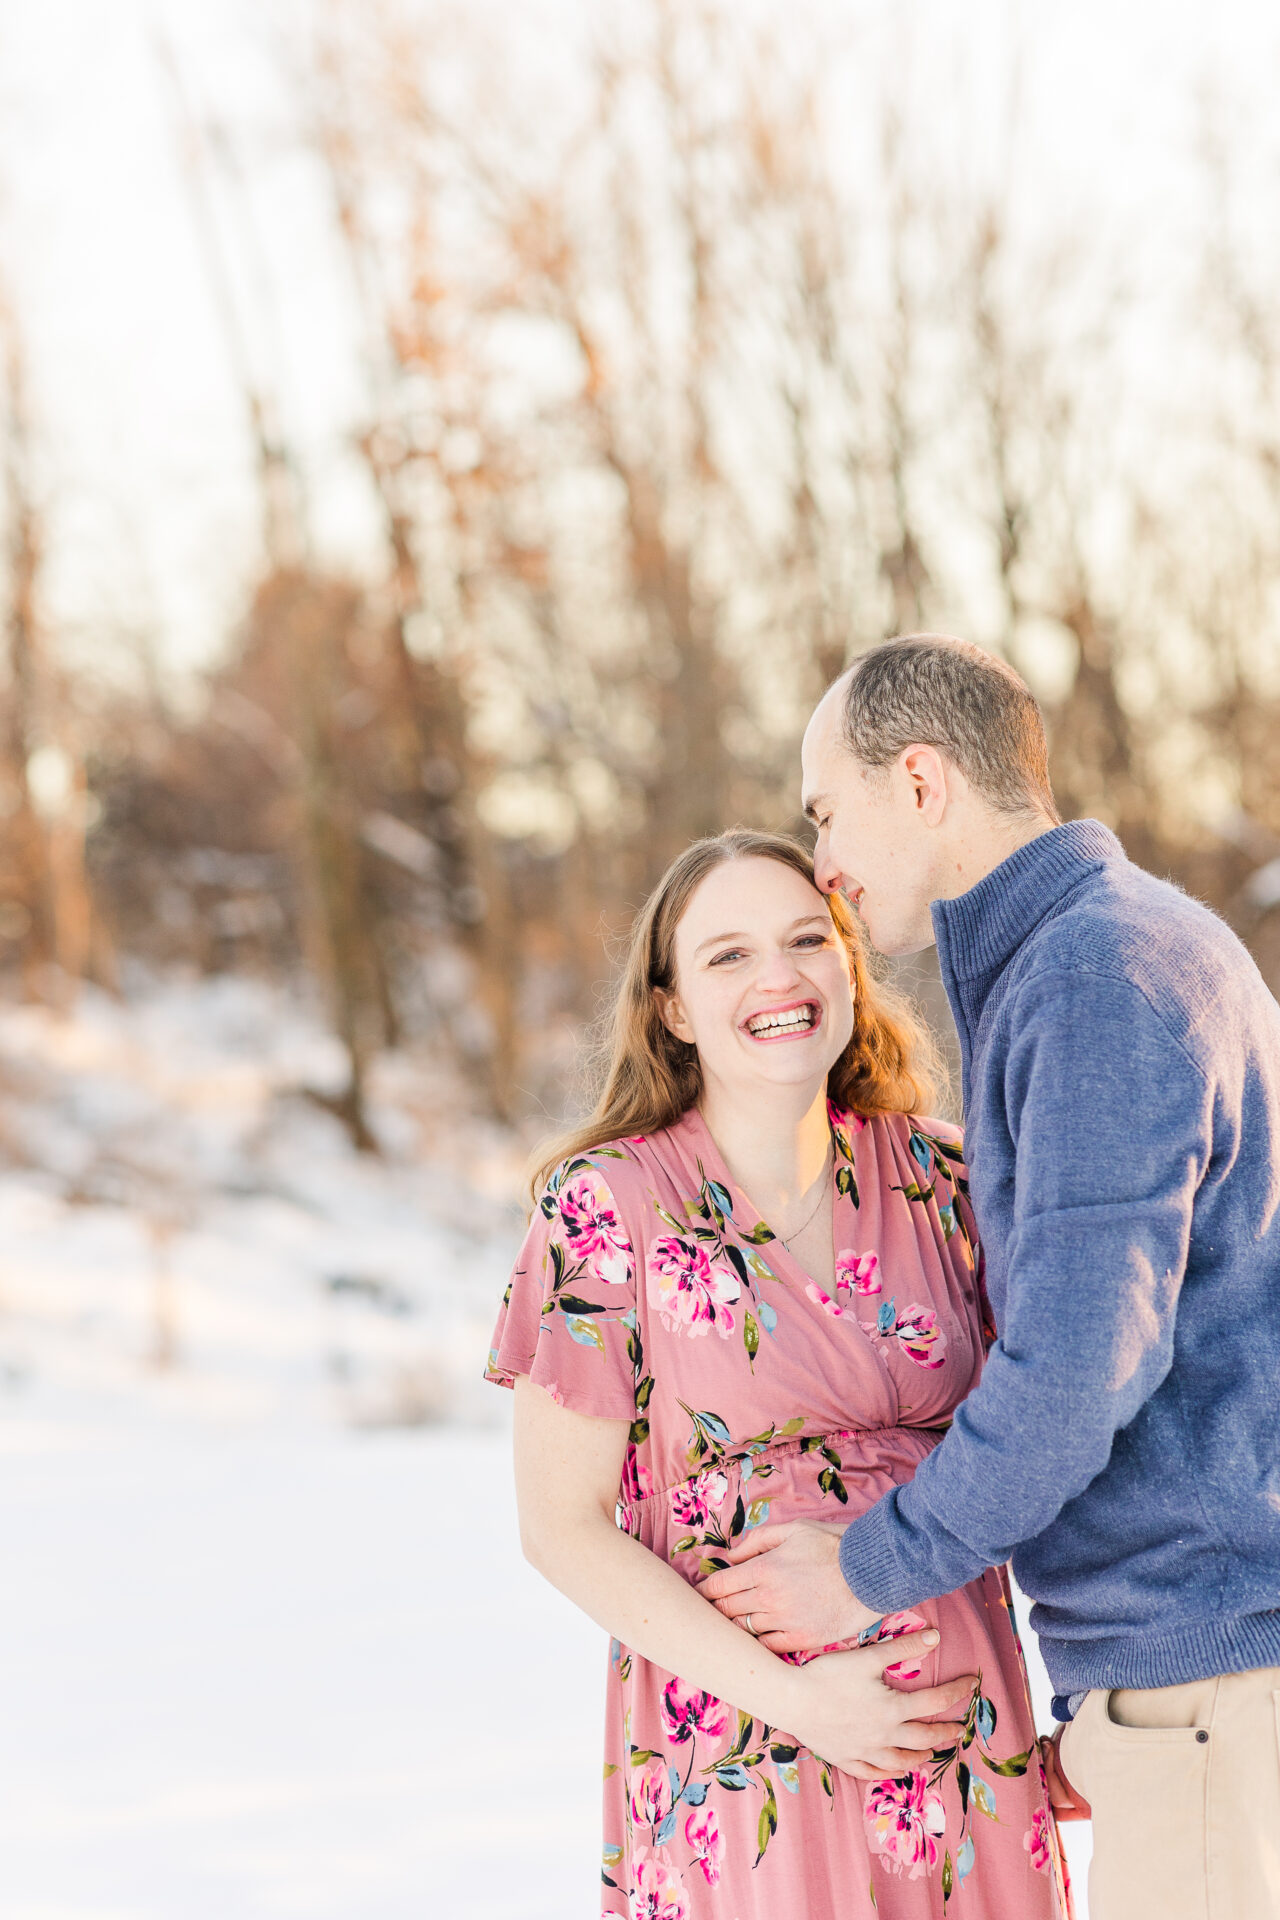 pregnants woman laughs while husband kisses her head during snowy maternity session with Sara Sniderman Photography at Medfield State Hospital in Medfield Massachusetts